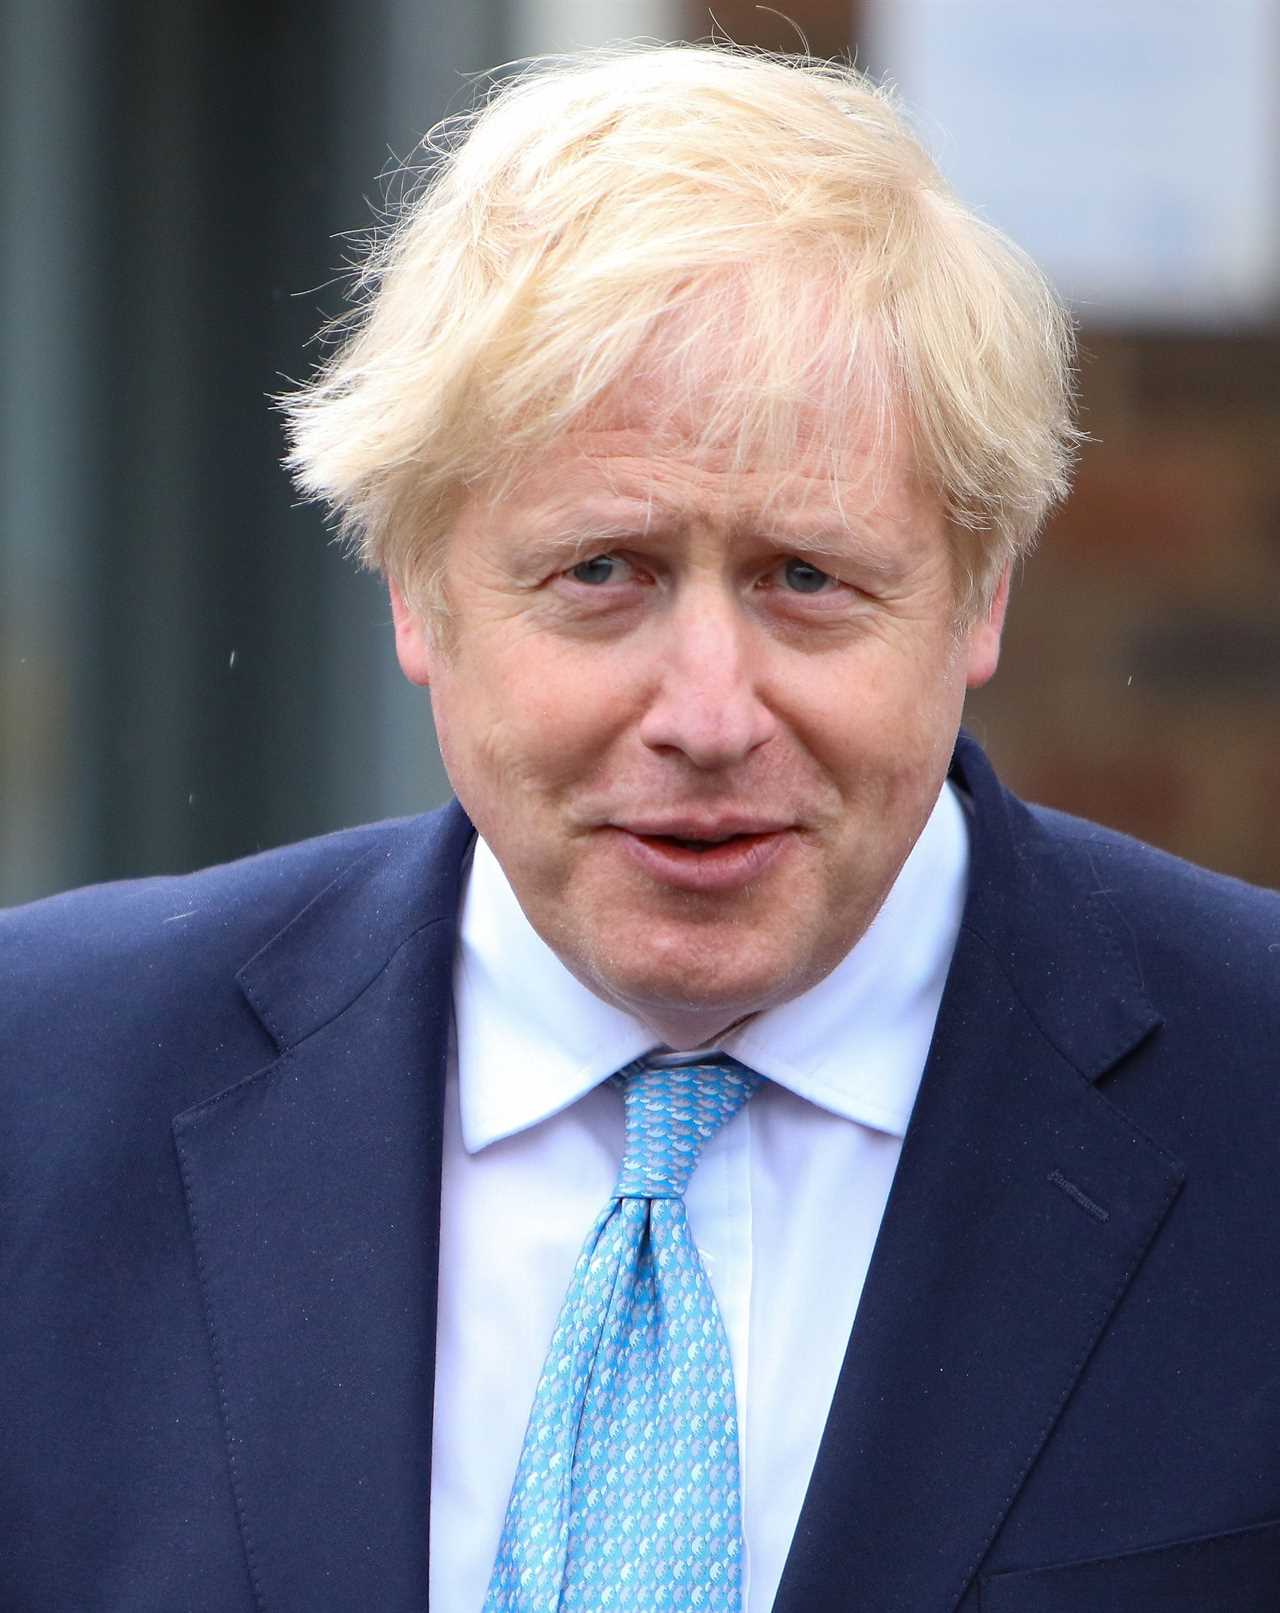 Hugging and kissing allowed from May 17 — as Boris Johnson reveals Britain is ‘on track’ for return to normality